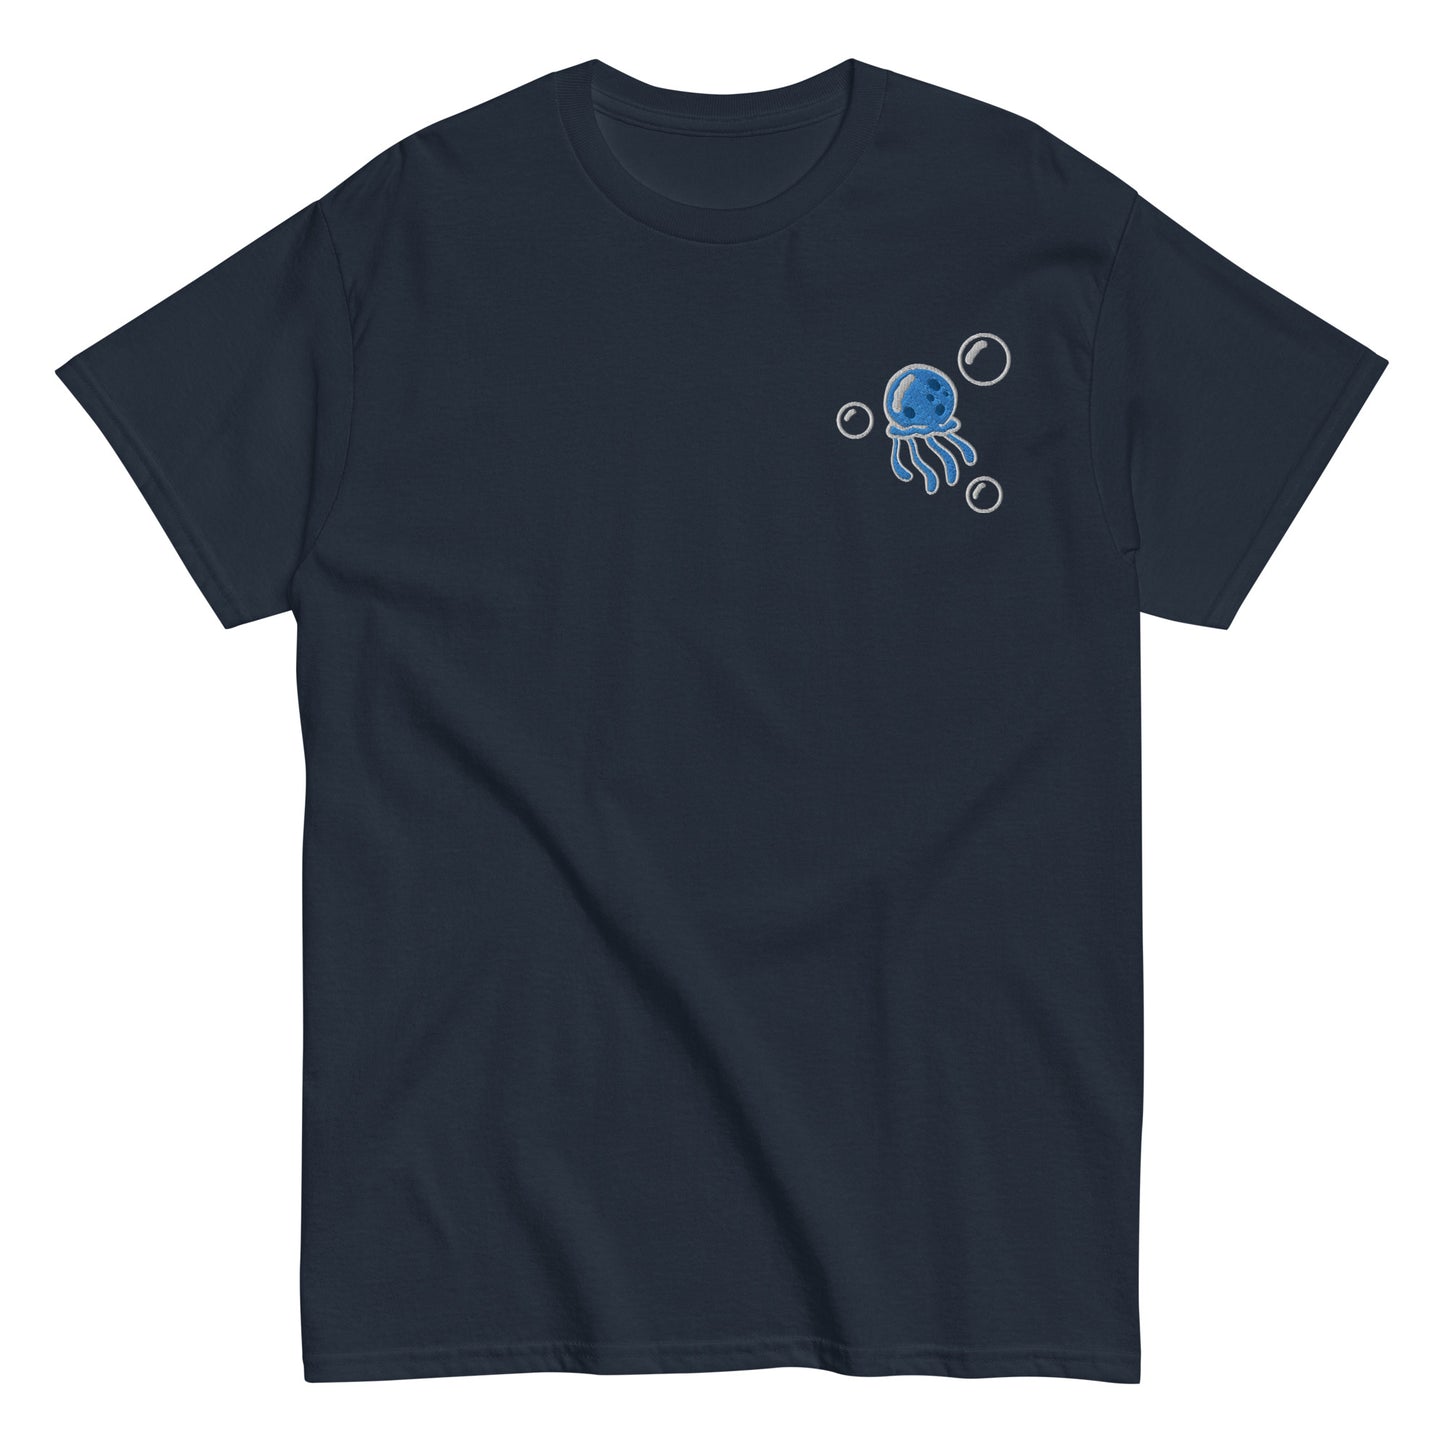 Jellyfish BLUE embroidered t-shirt